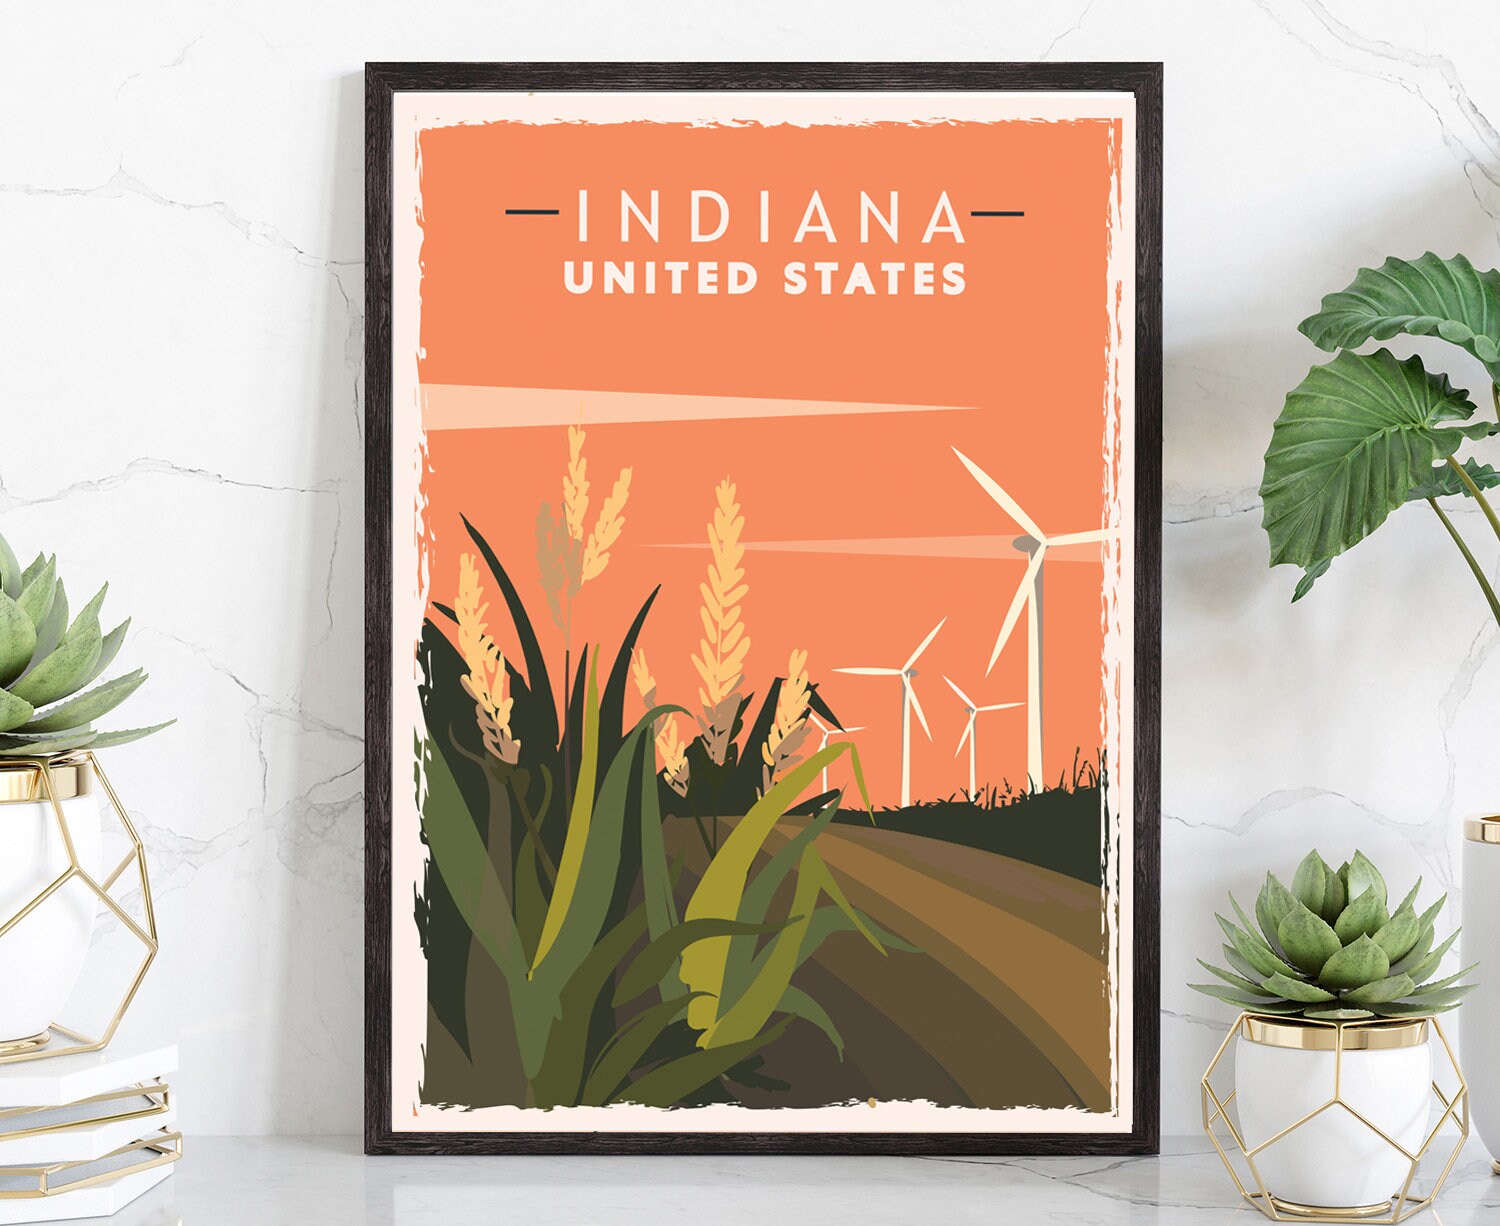 Indiana Vintage Rustic Poster Print, Retro Style Travel Poster